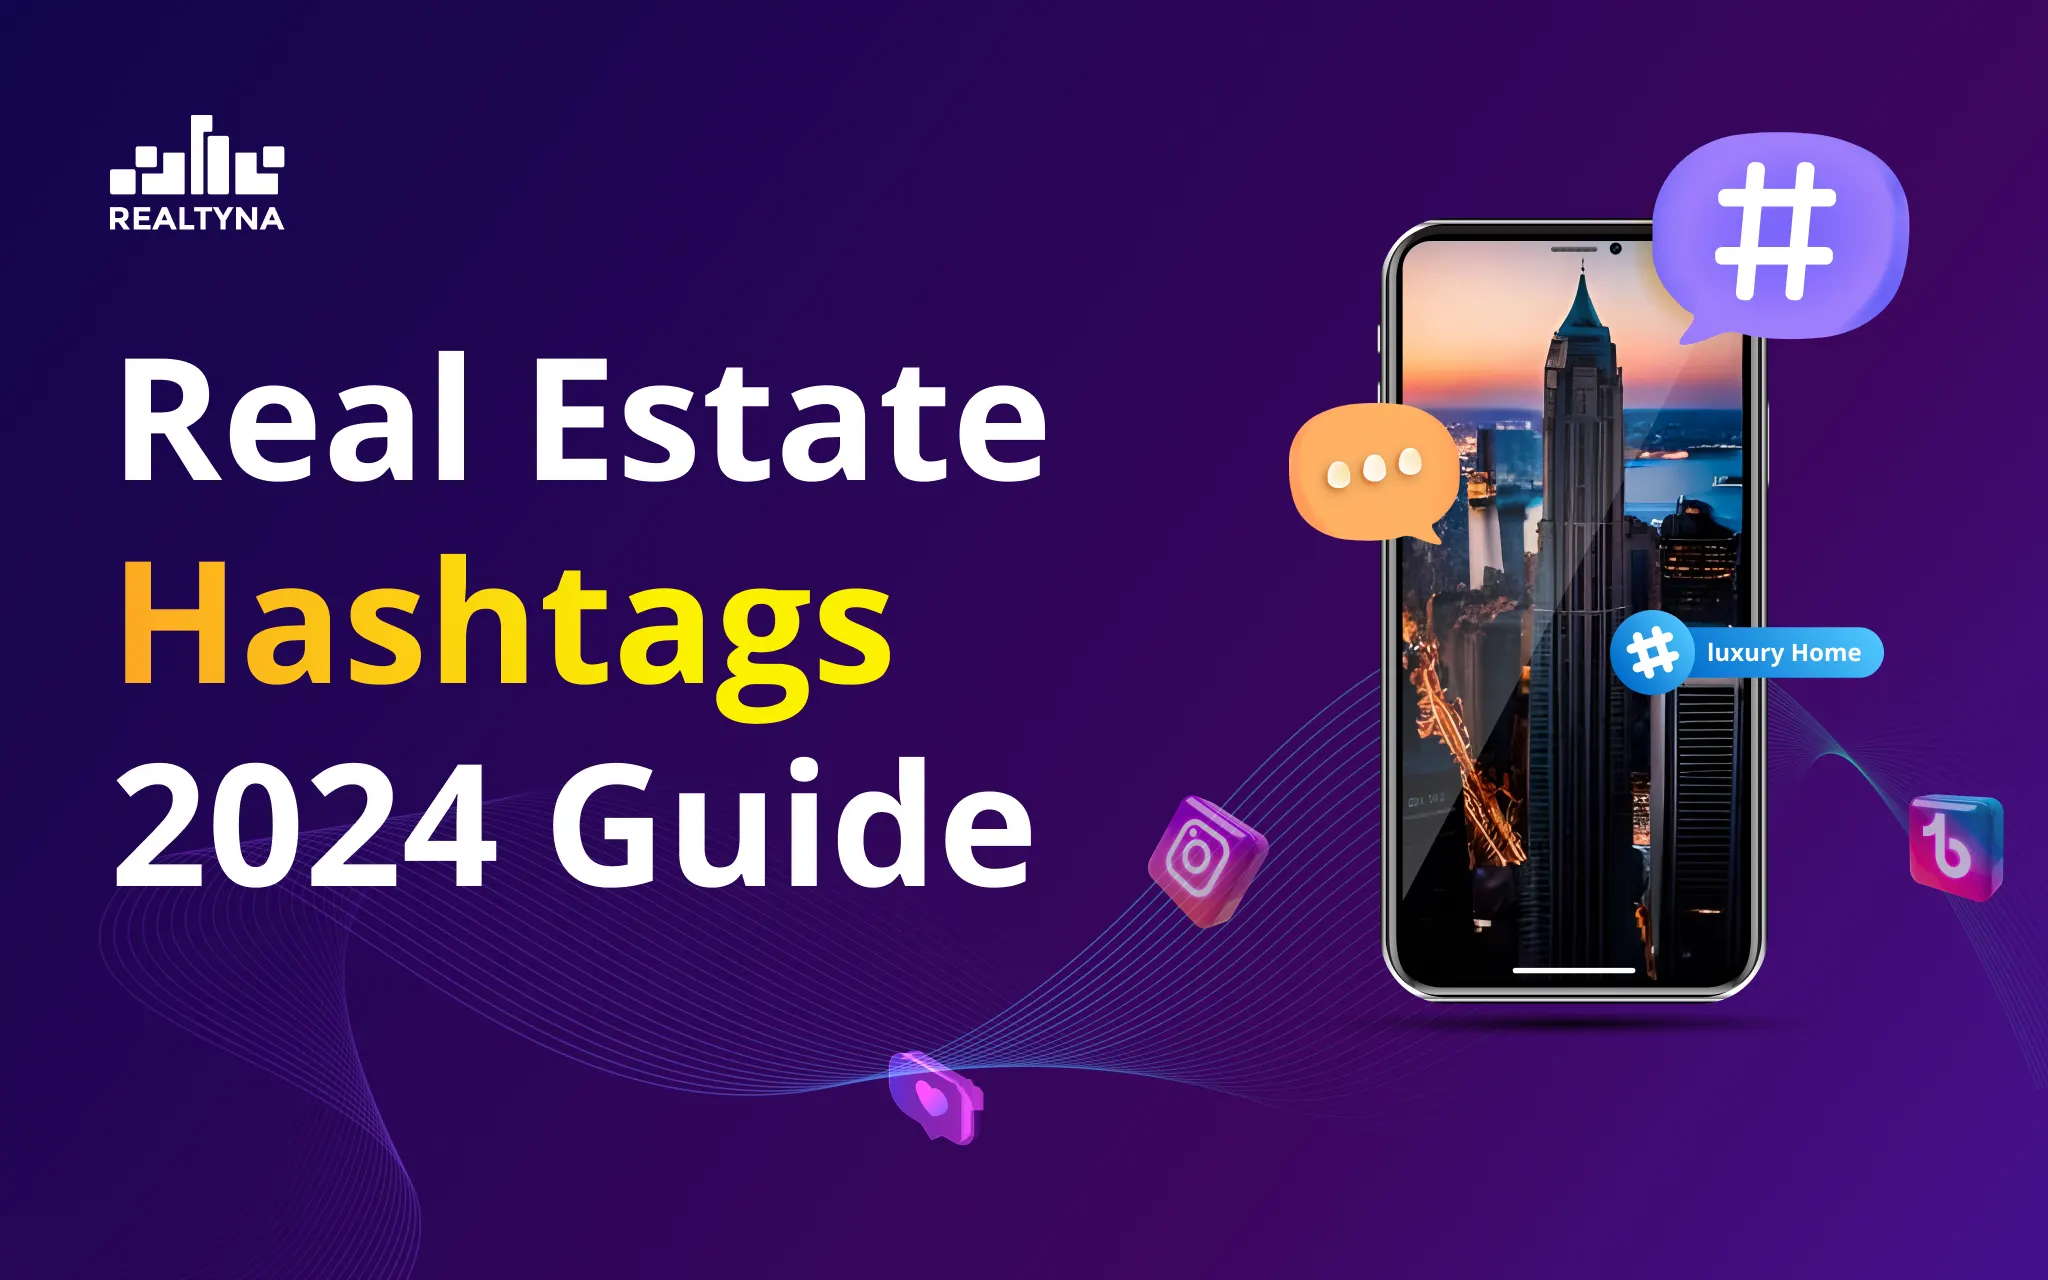 Real Estate Hashtags 2024 Guide